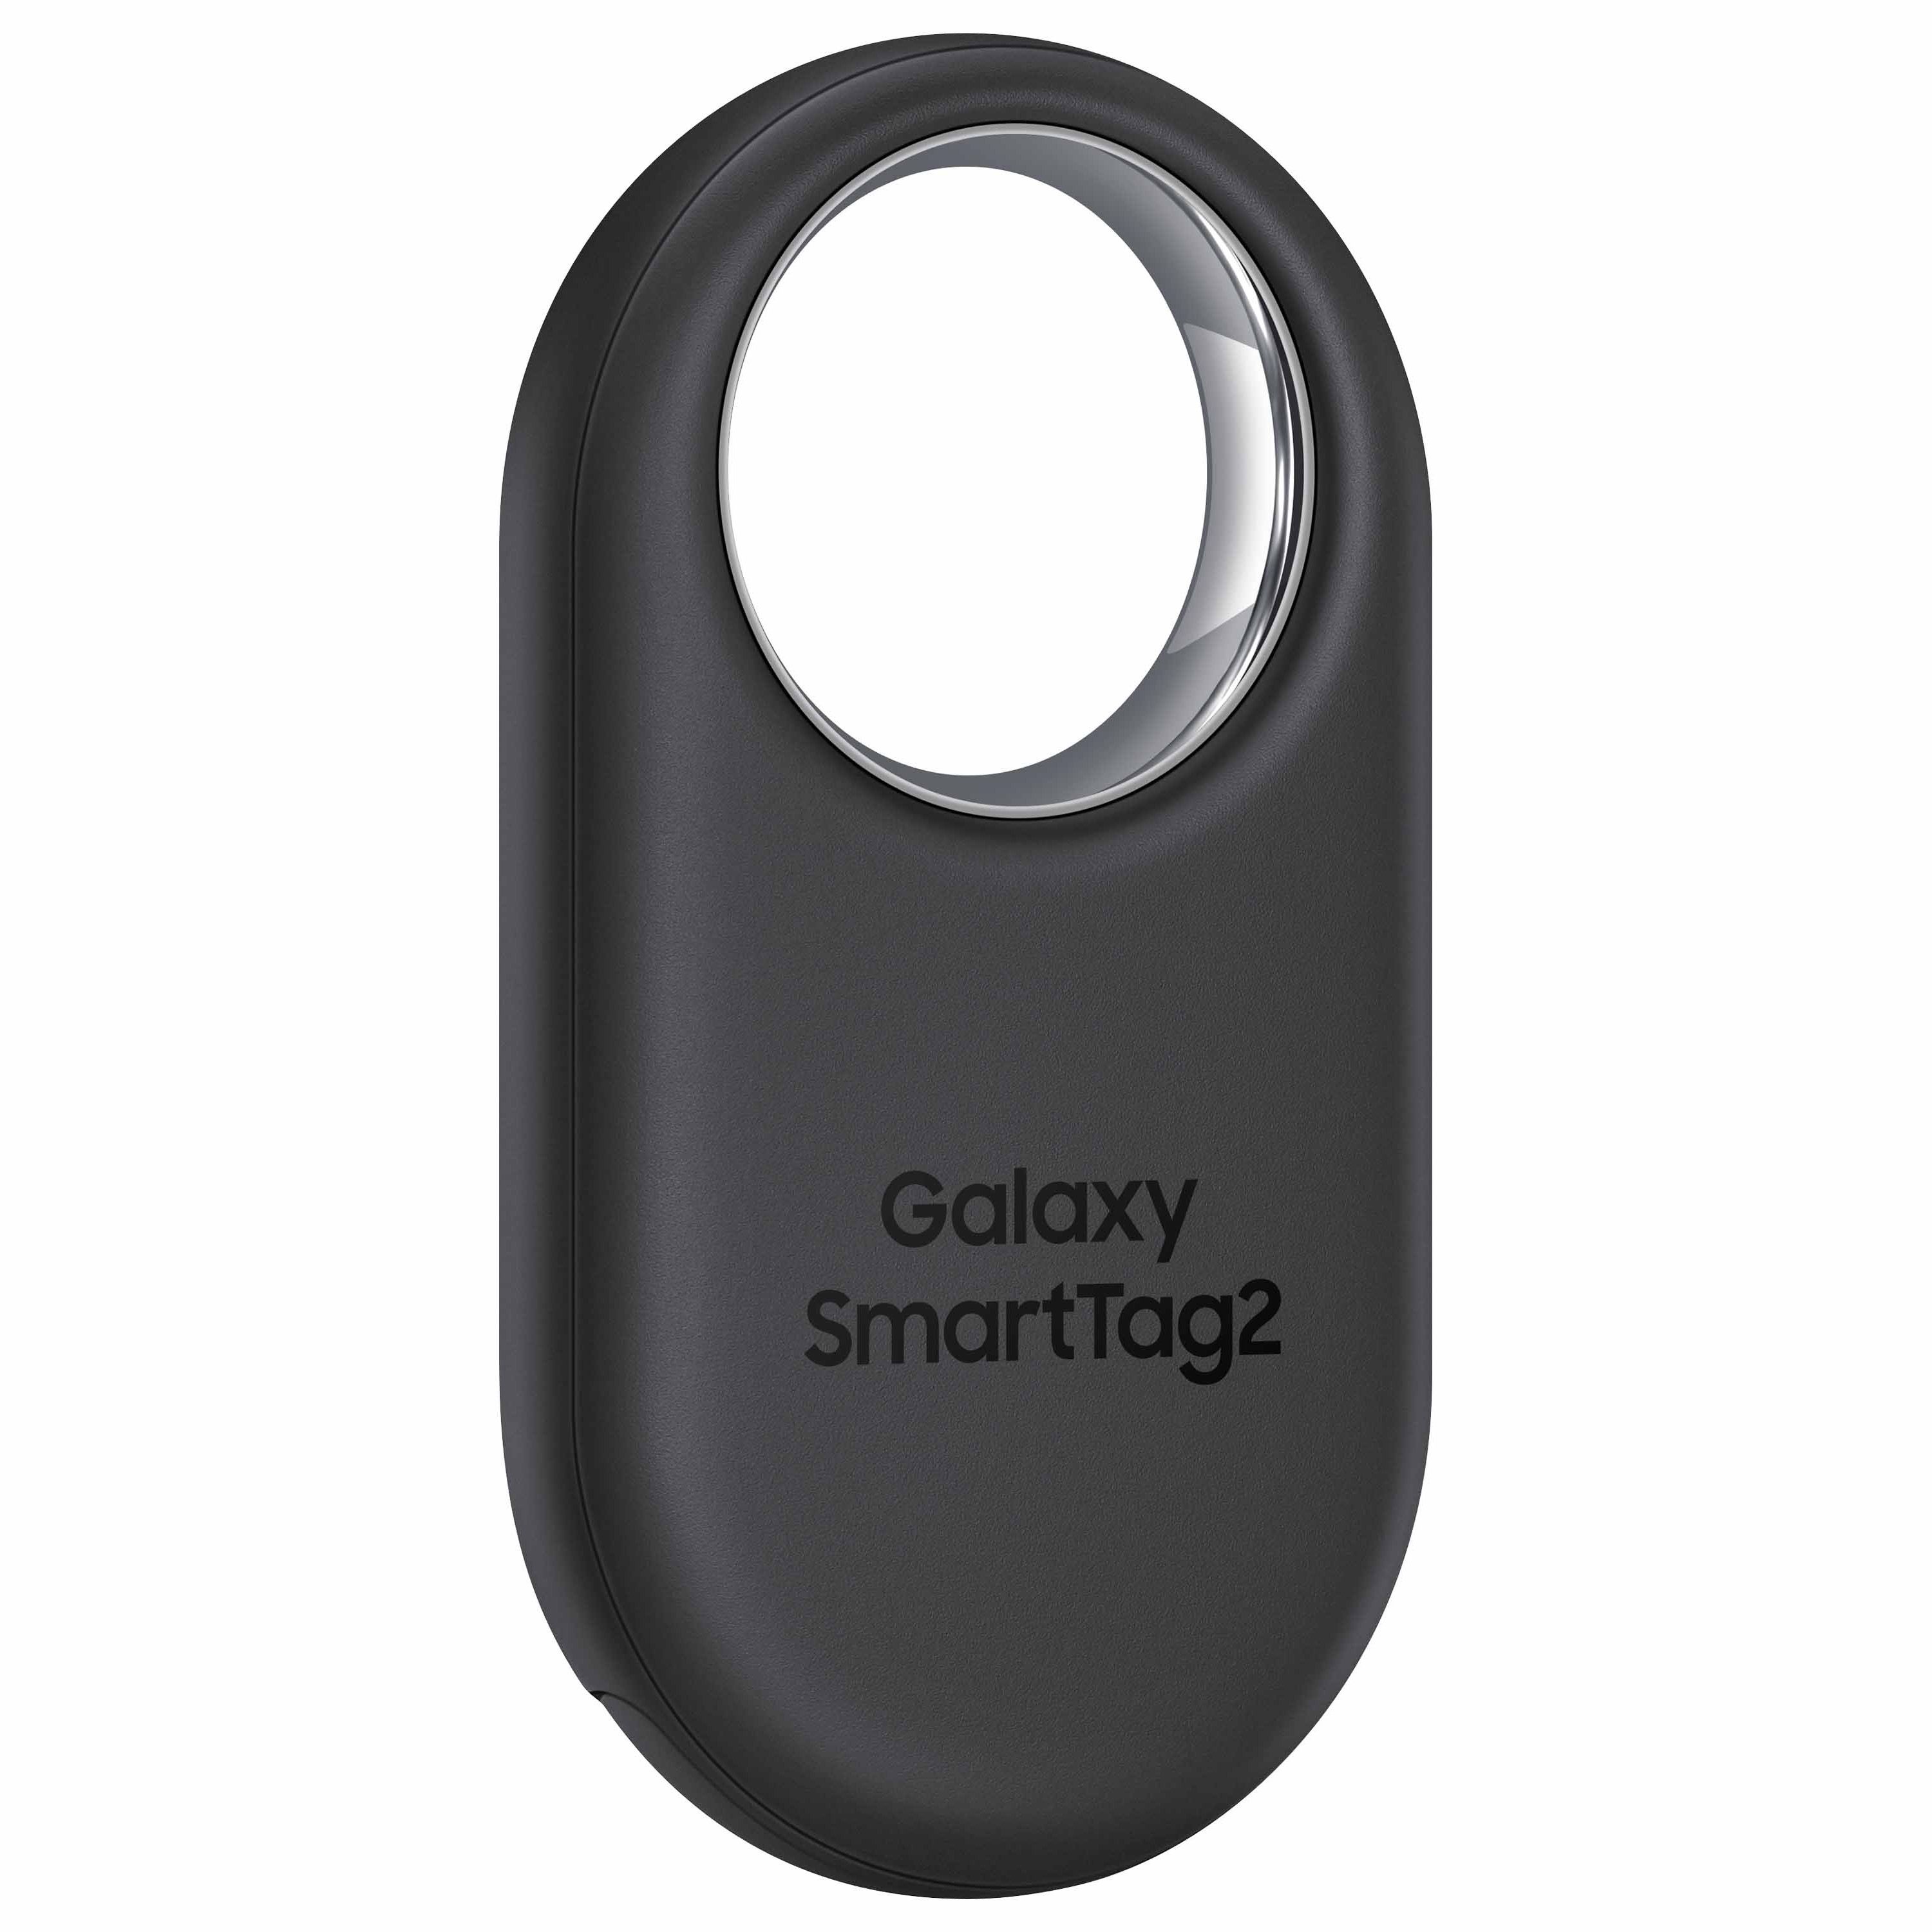 Samsung Galaxy SmartTag 2 vs. Chipolo One: Ecosystem or universal access?